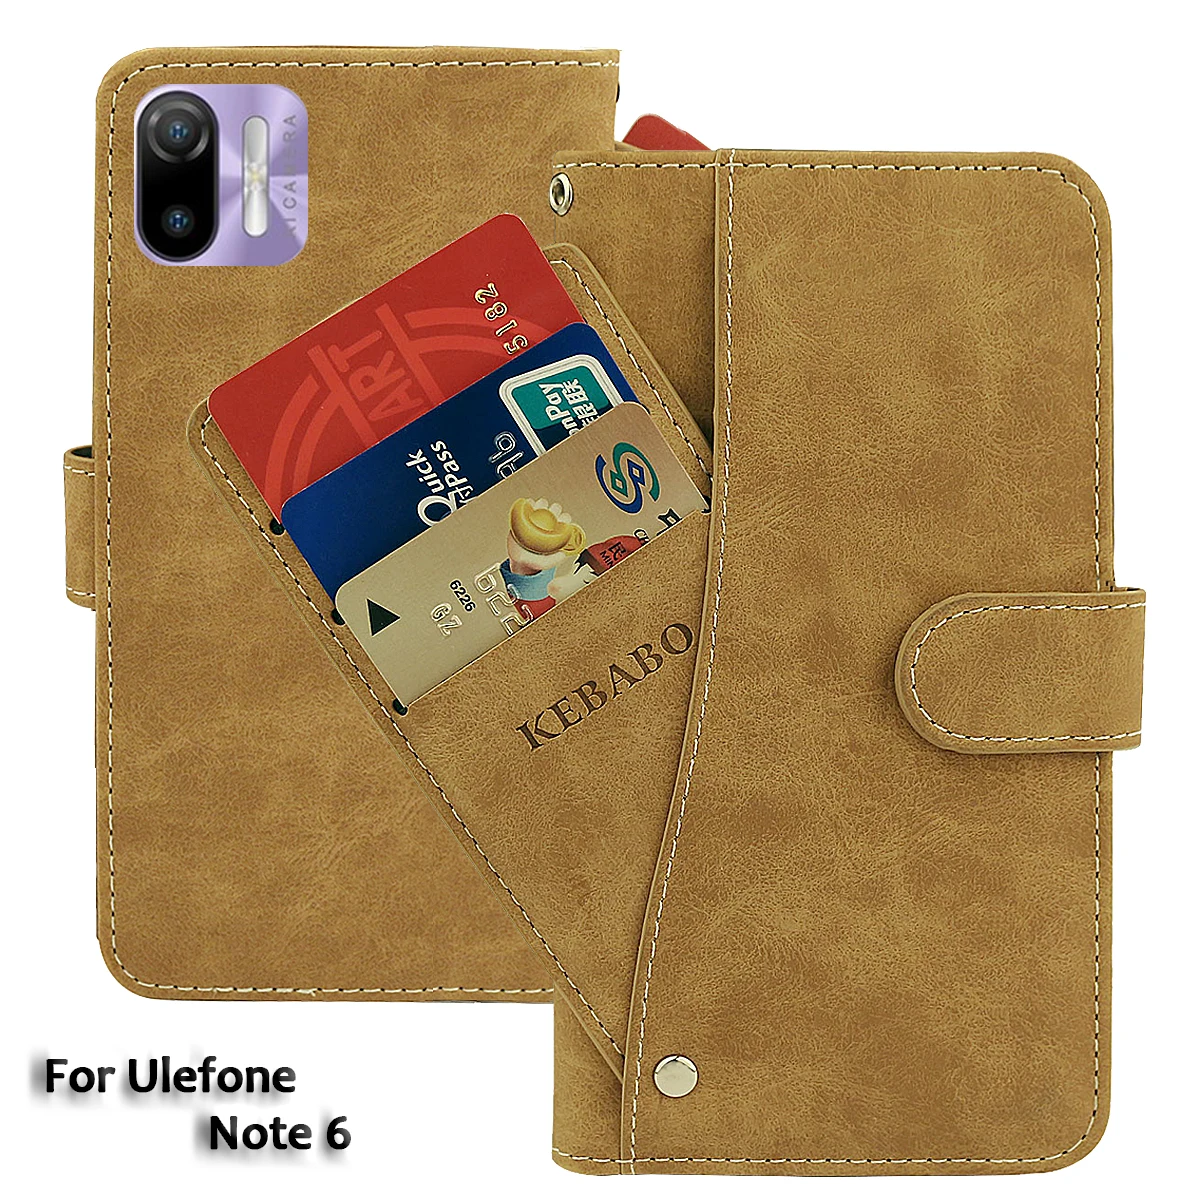 

Vintage Leather Wallet Ulefone Note 6 Case 6.1" Flip Luxury Card Slots Cover Magnet Phone Protective Cases Bags